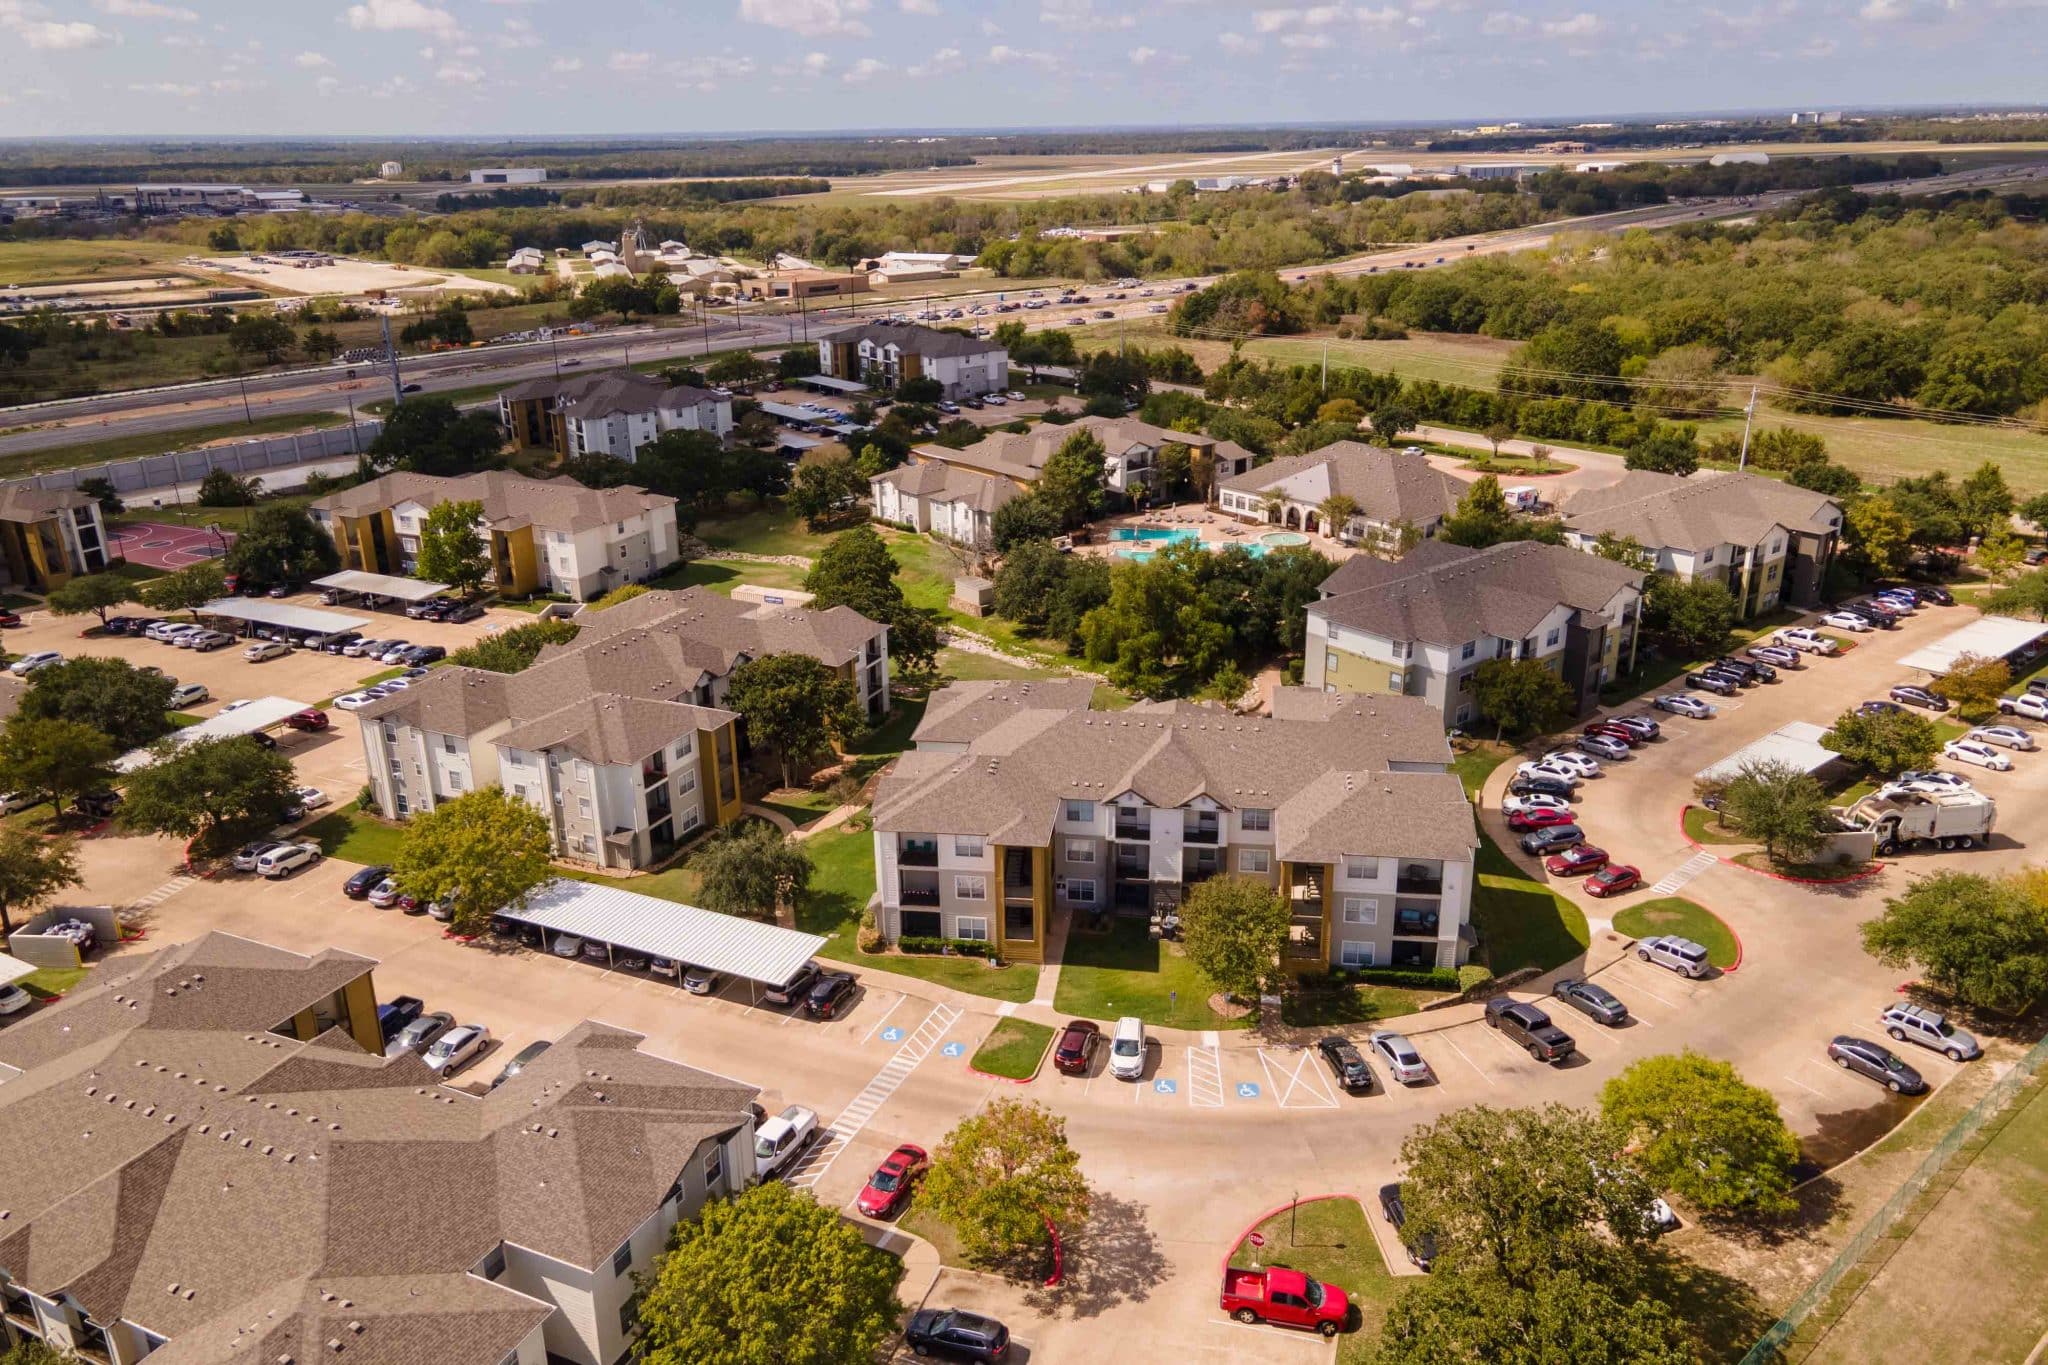 university trails college station off campus apartments near texas a m aerial view of community